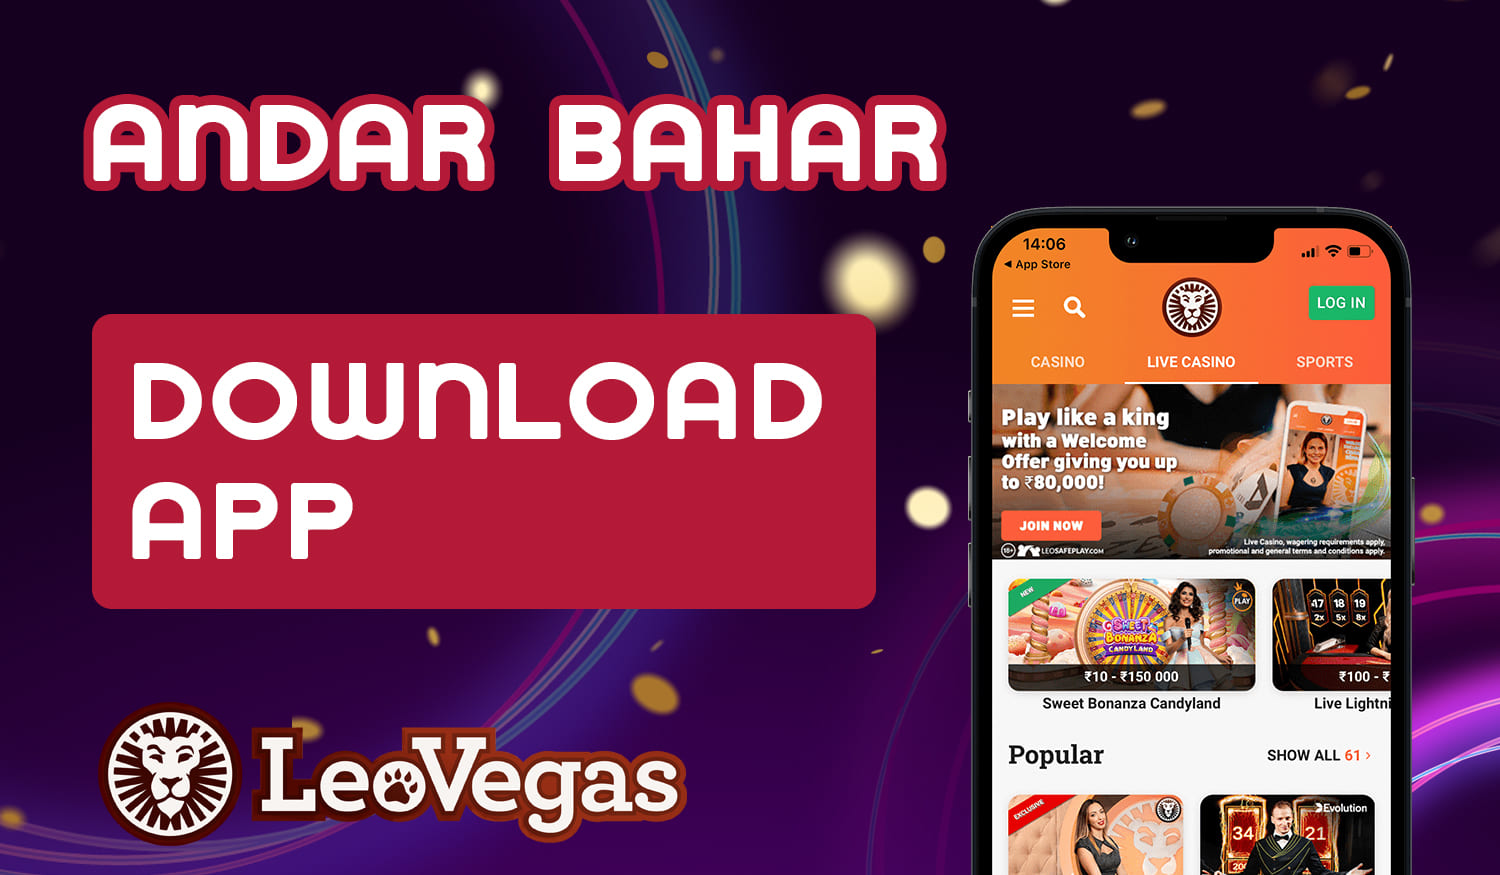 How to download and install the LeoVegas app and start playing Andar Bahar